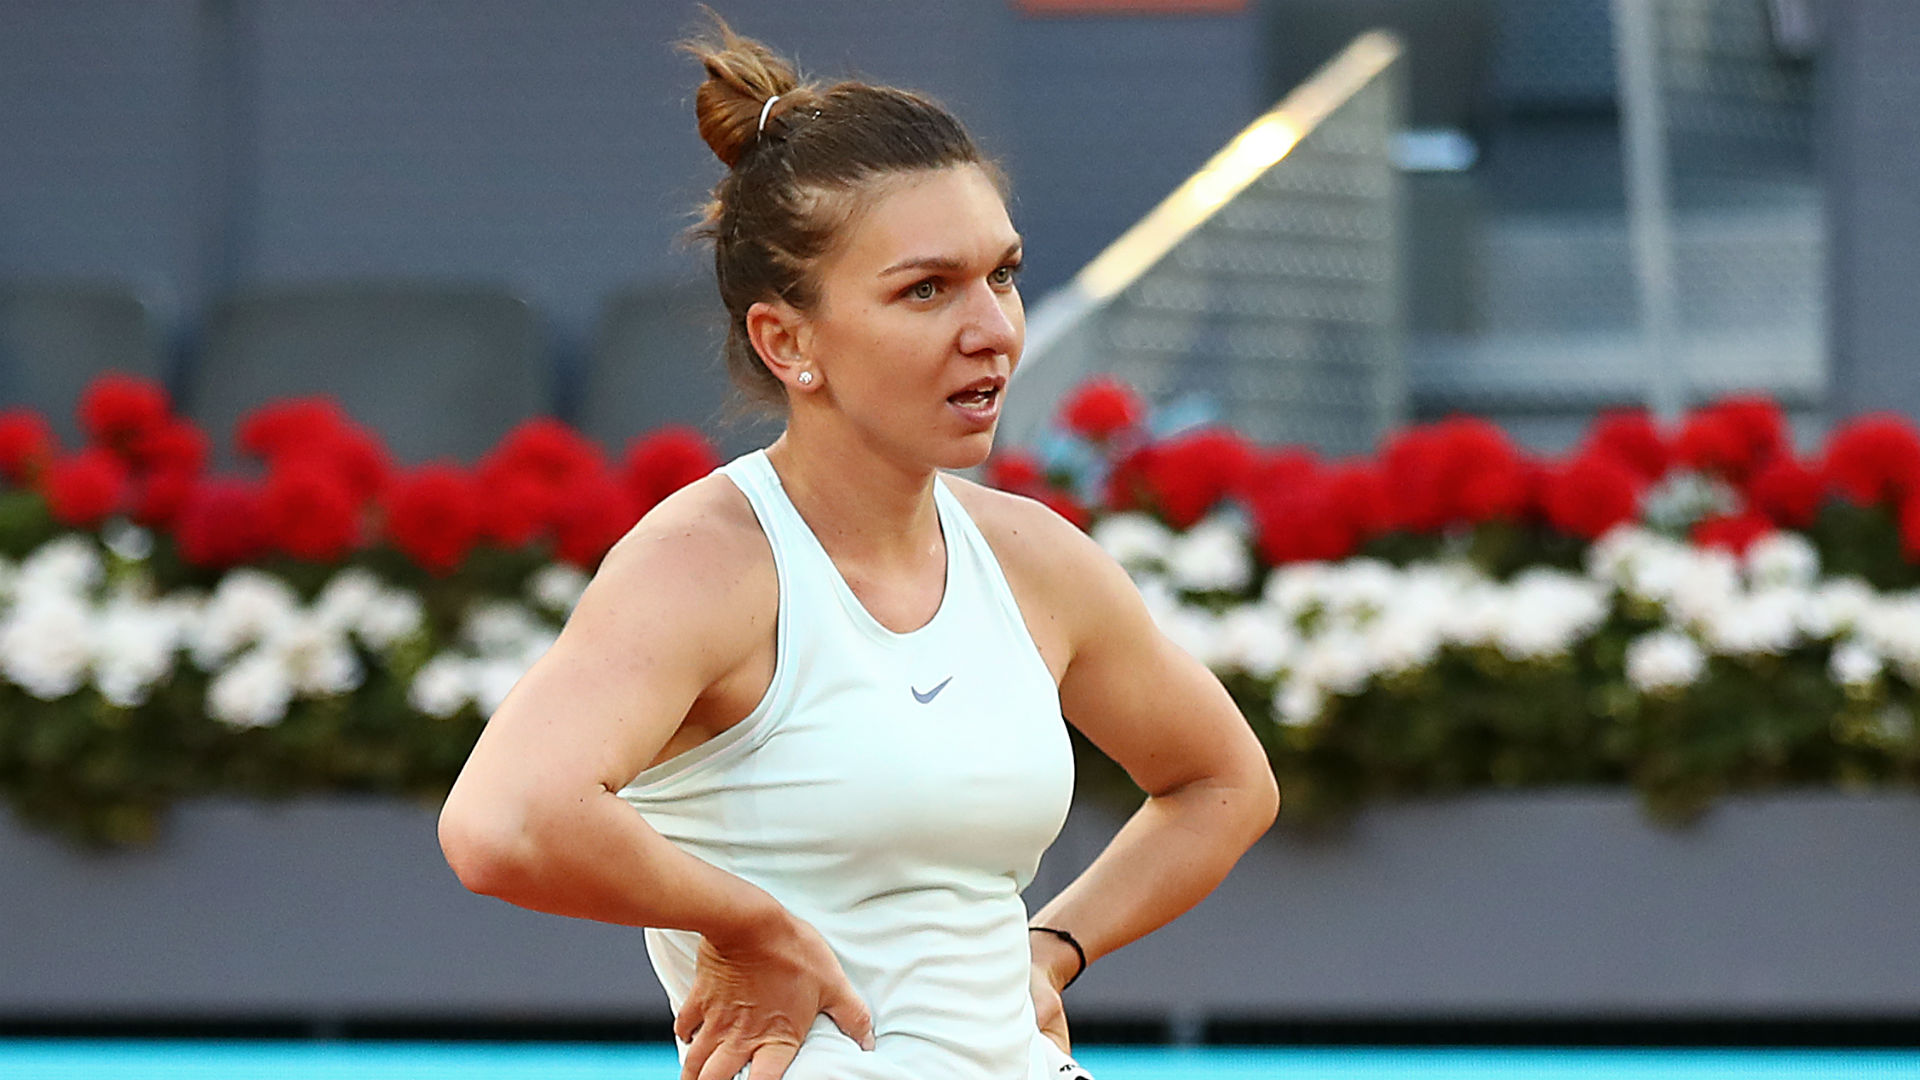 Simona Halep's early exit in Rome ensured Naomi Osaka has achieved her goal of being top seed at the French Open.